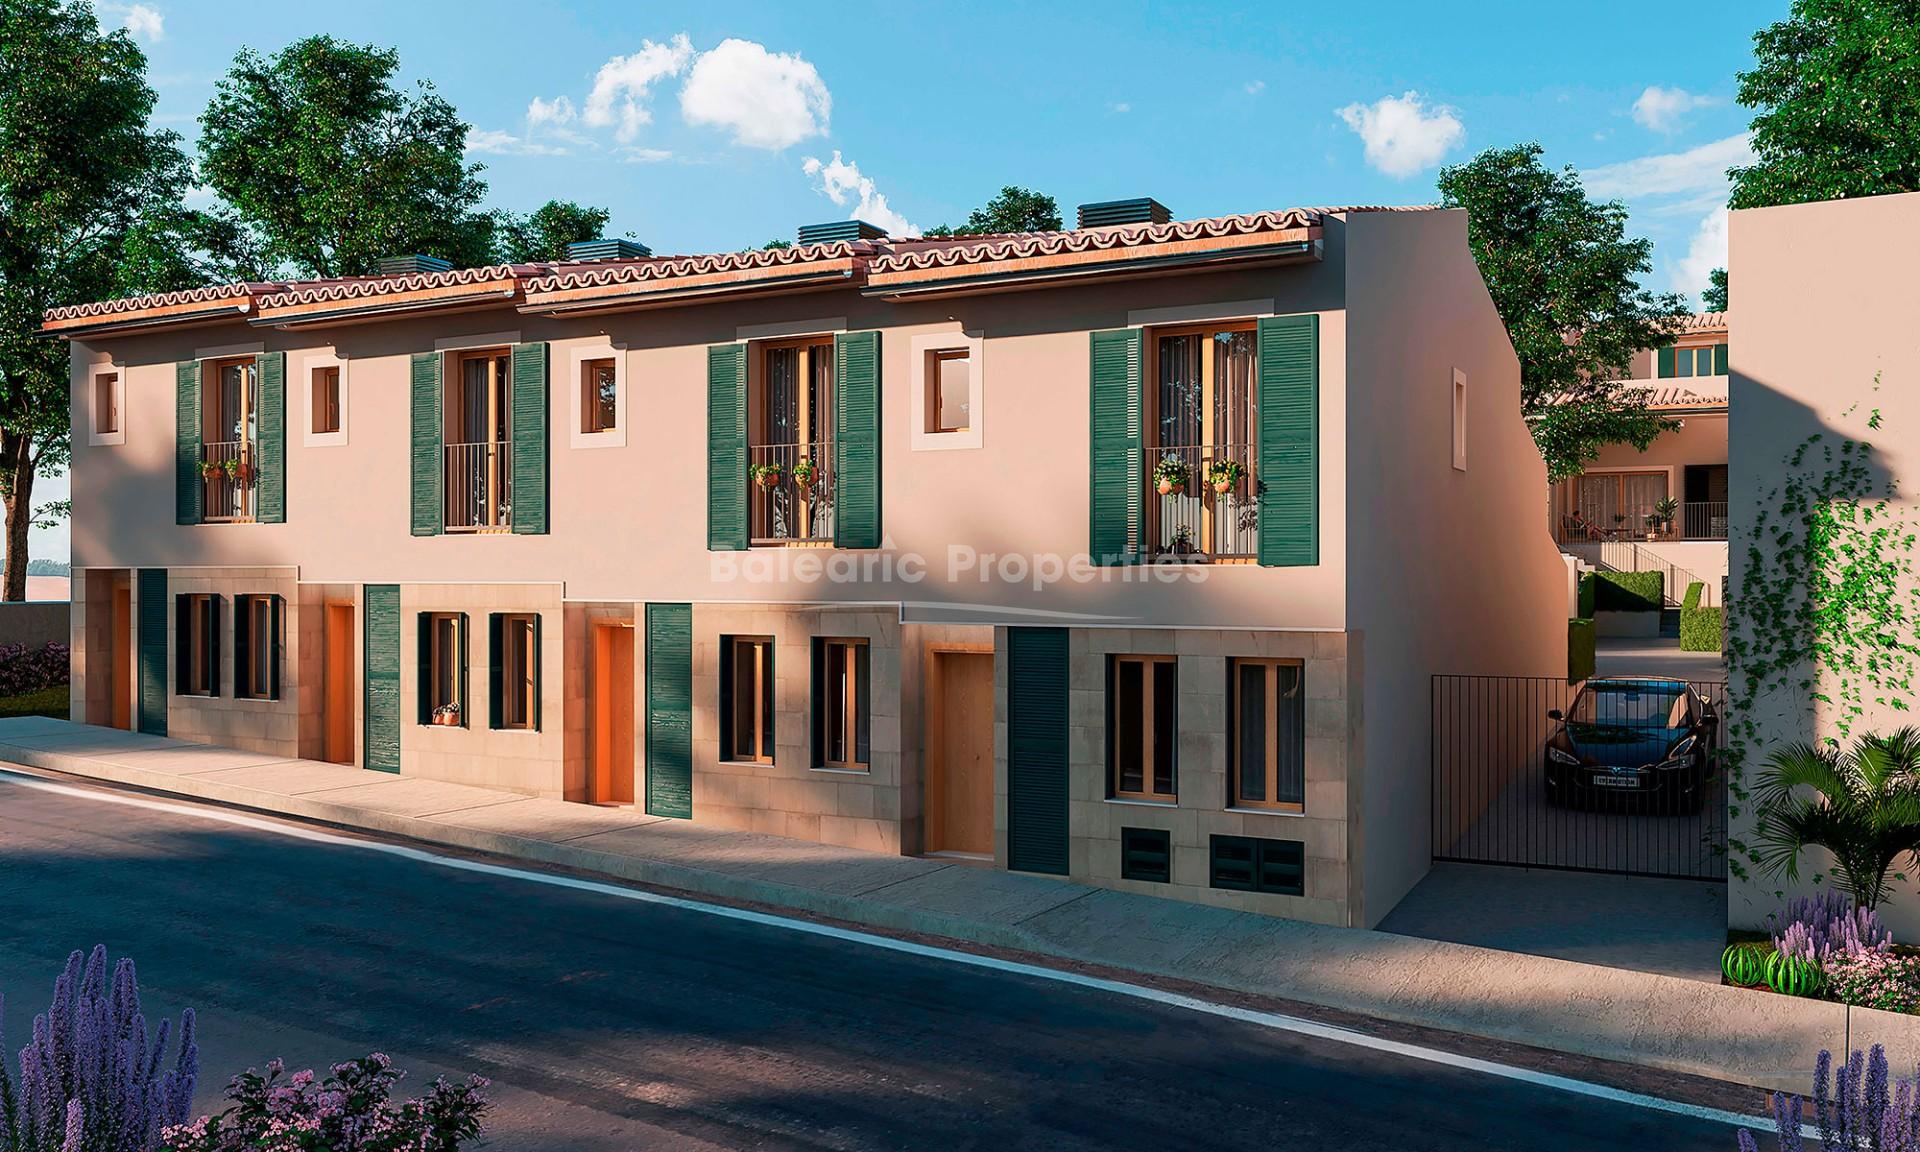 New project of modern townhouse in the town of Calvia for sale, Mallorca